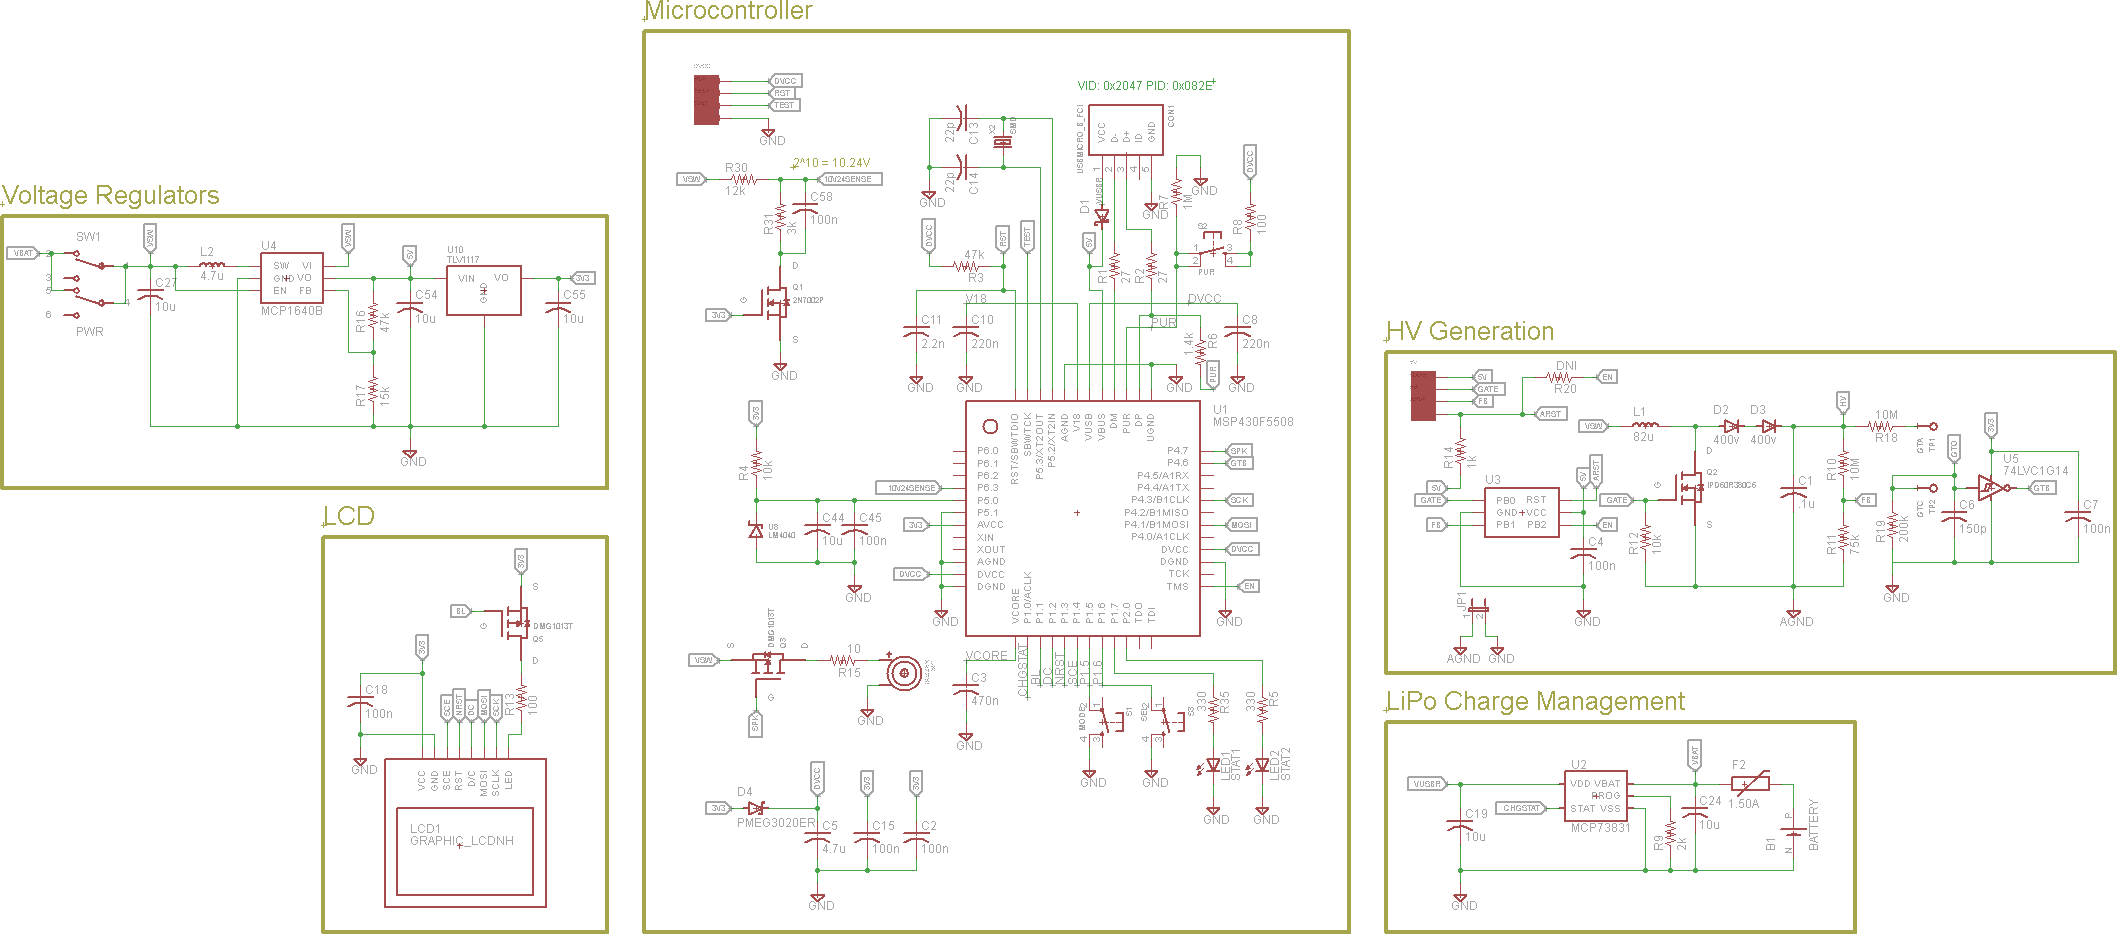 File:GC-D 1000 Schematic.png